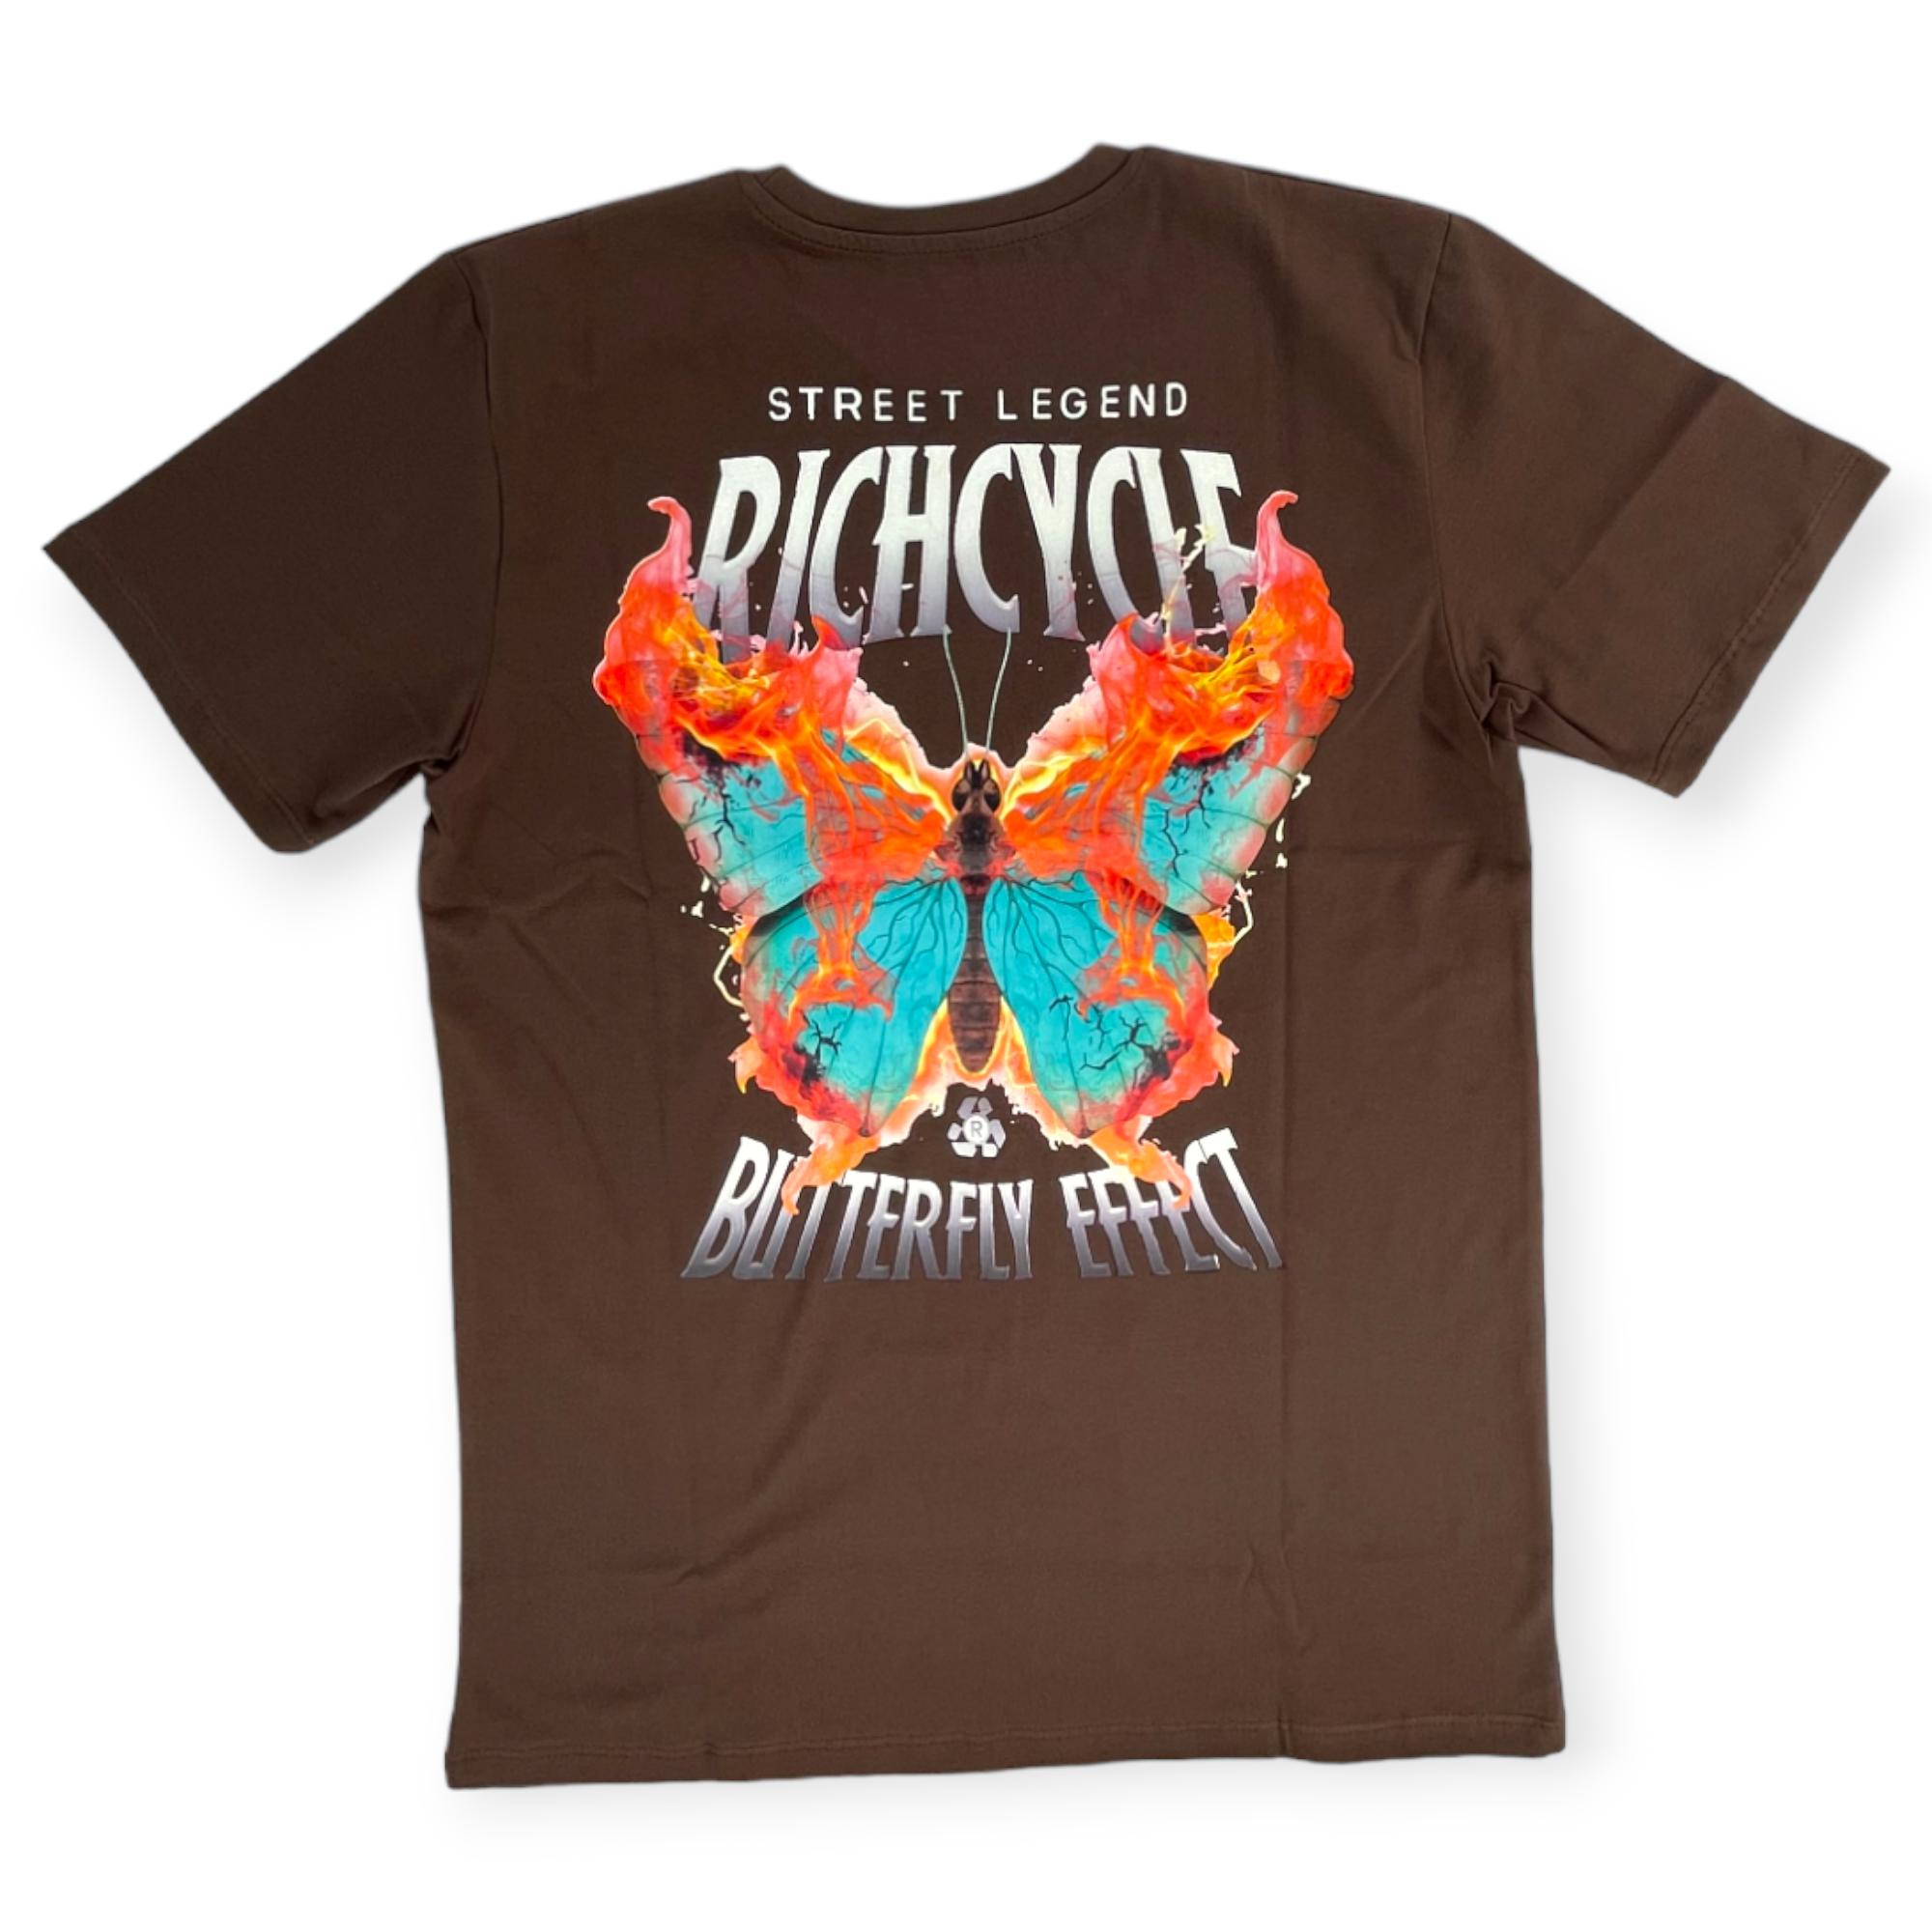 Rich Cycle Men Fly Better T-Shirt (Brown)